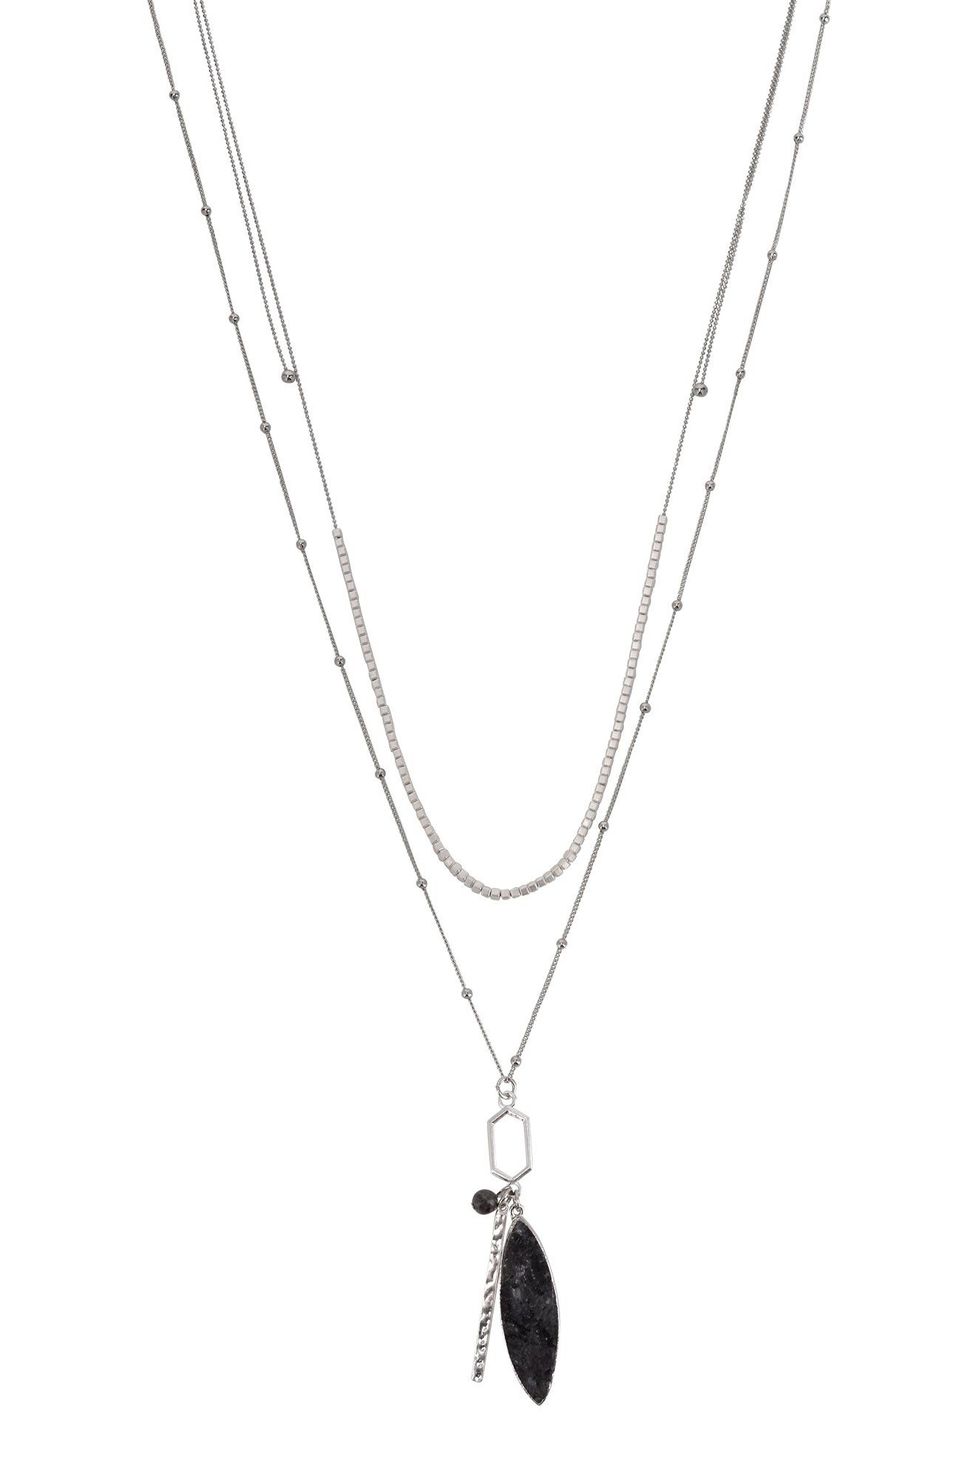 The Pioneer Woman Jewelry, Soft Silver-tone Duo Necklace Set with Genuine Stone